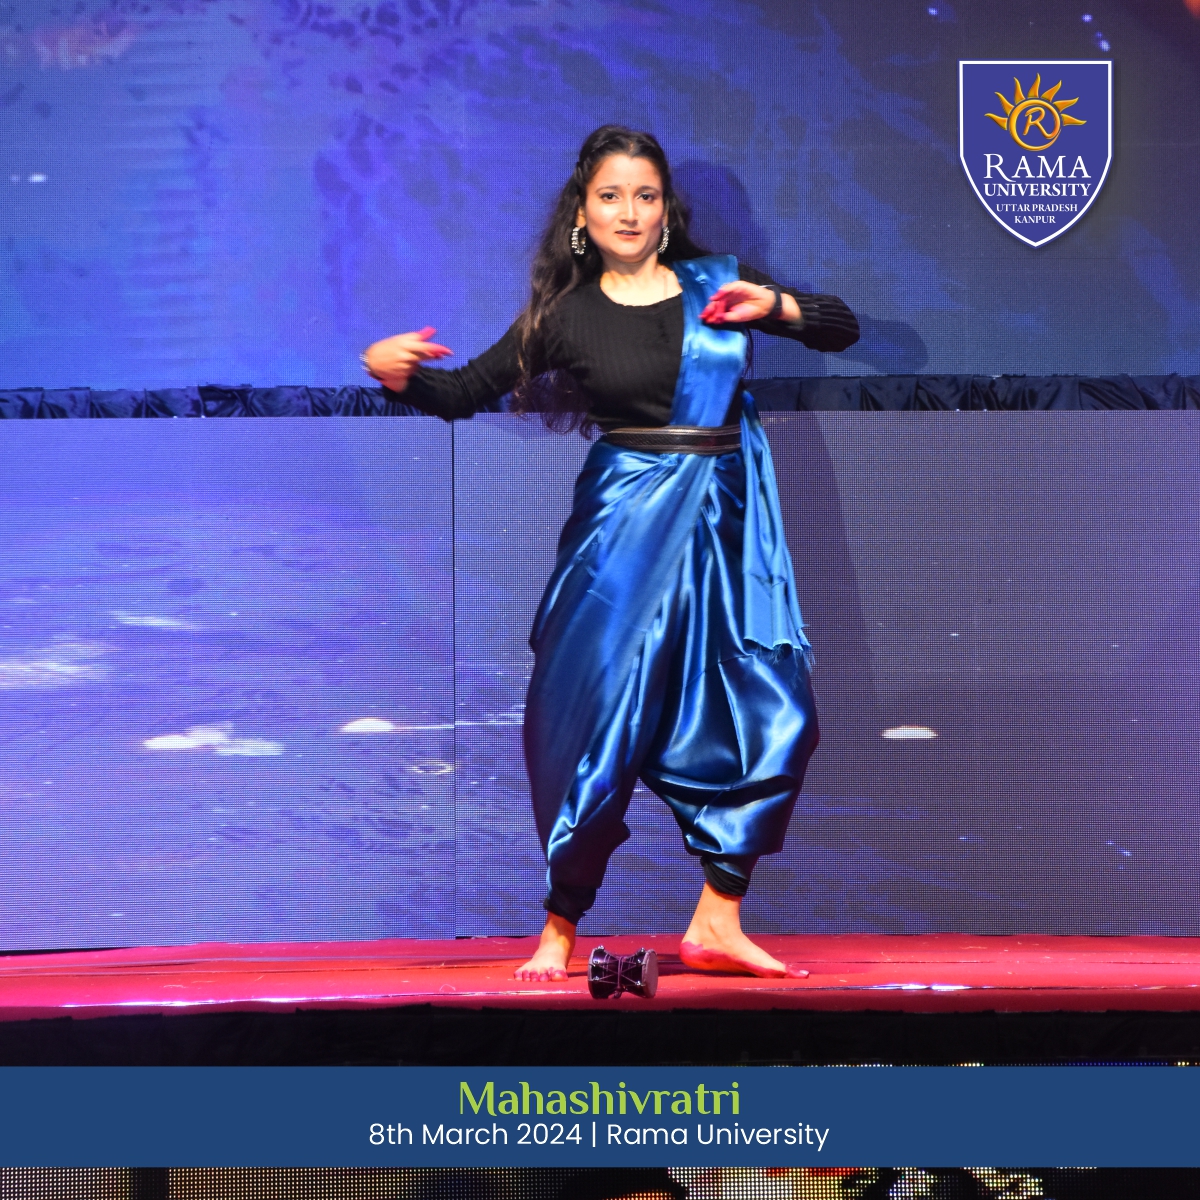 ✨More glimpses of Maha Shivratri!🌟 Renowned dancers mesmerized the evening with graceful movements, depicting facets of Lord Shiva's persona💃

#RamaUniversity #Kanpur #MahaShivratri #DivineDance #LordShiva #GracefulMovements #DivineBliss #ShivTandava #DivineProtector